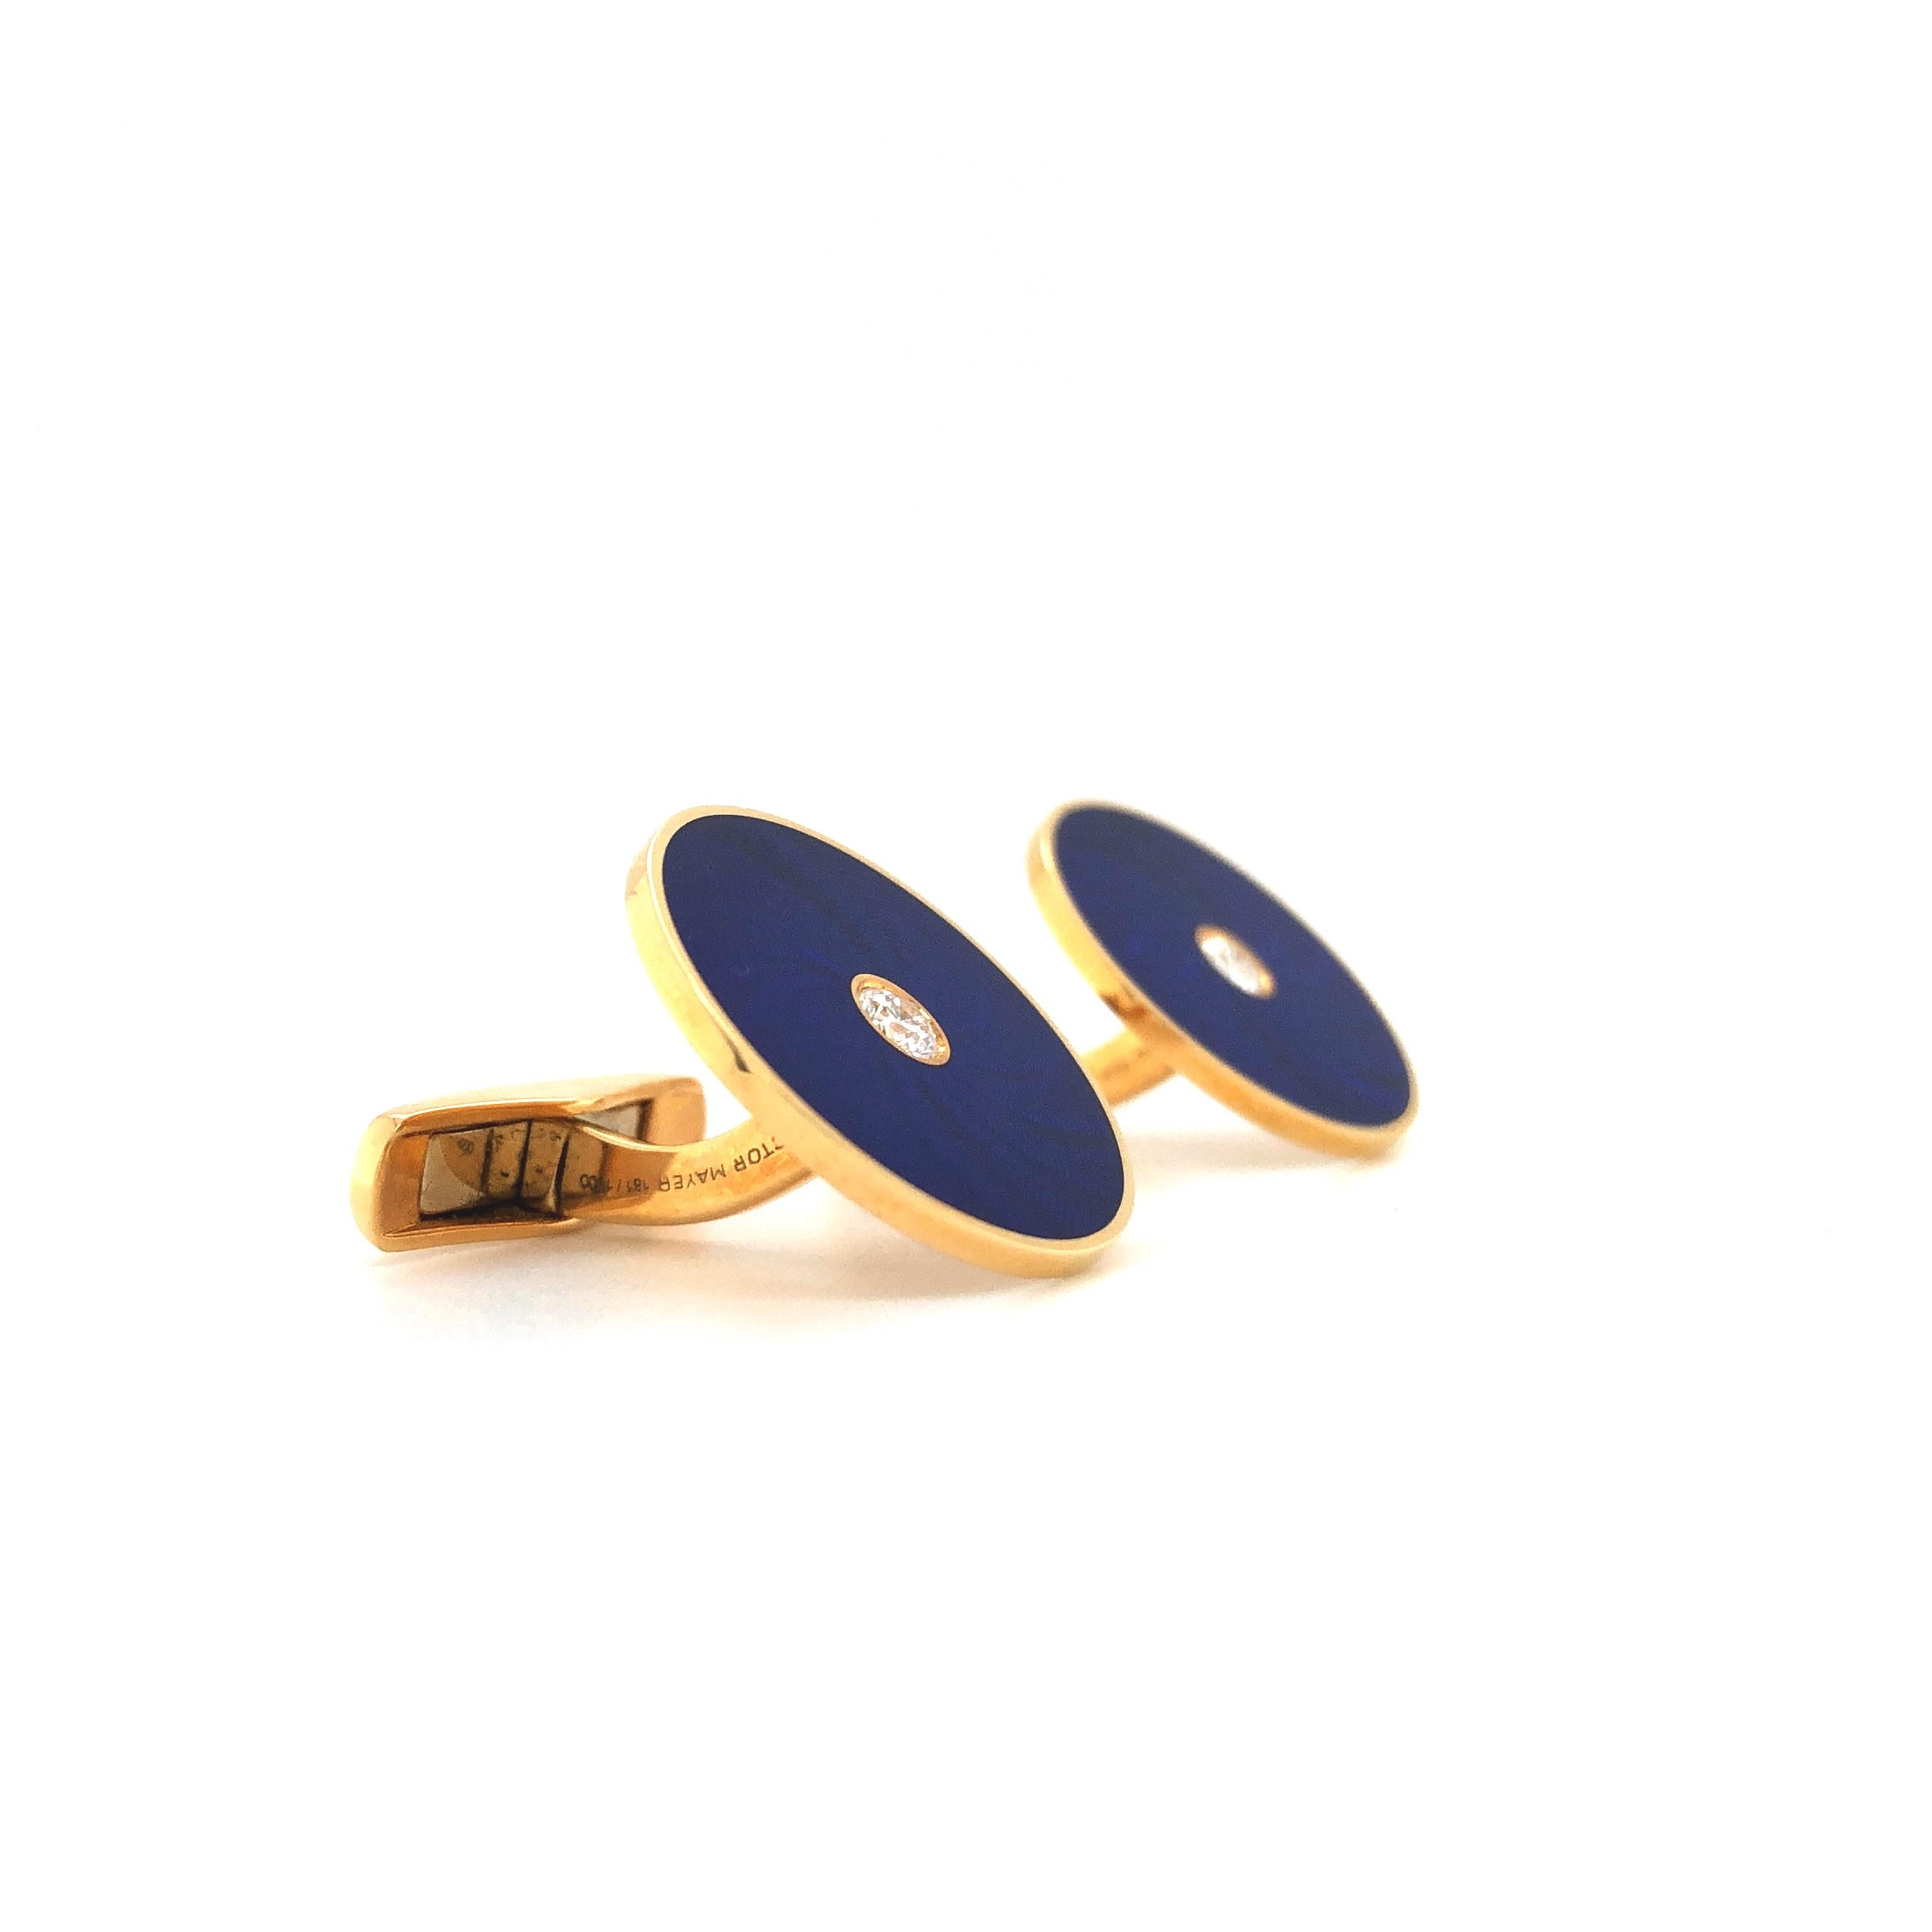 Victor Mayer round cufflinks, Globetrotter Collection, 18k yellow gold, navy blue vitreous enamel, windmill guilloche, 2 diamonds, total 0.26 ct, G VS, diameter 20.0 mm

About the creator Victor Mayer
Victor Mayer is internationally renowned for